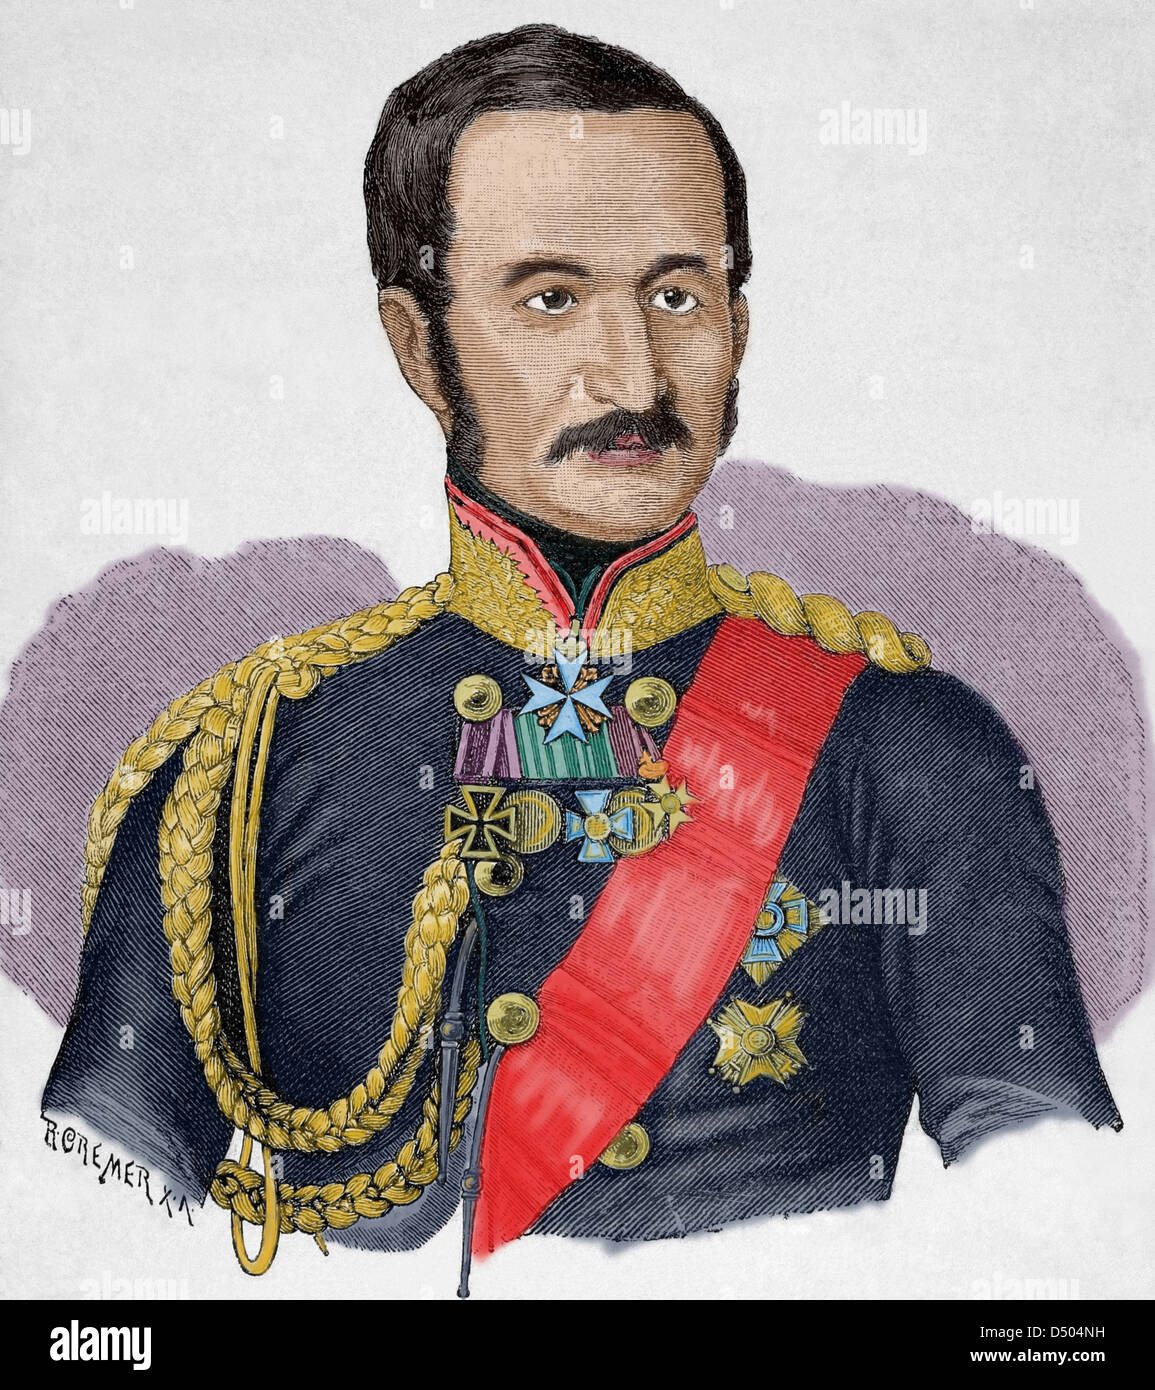 Adolf von Bonin (1803-1872). Prussian general. Engraving in The Universal History, 1885. Colored. Stock Photo